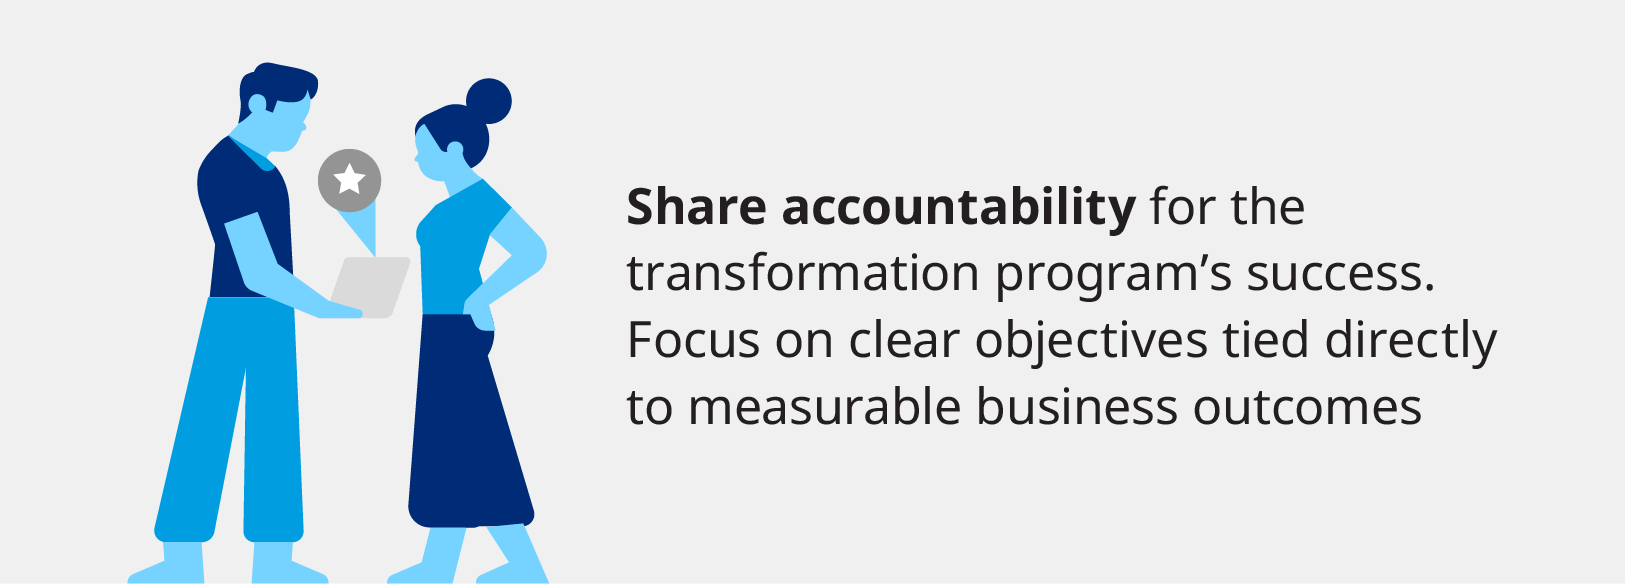 Share accountability for the transformation program's success. Focus on clear objectives tied directly to measurable business outcomes.